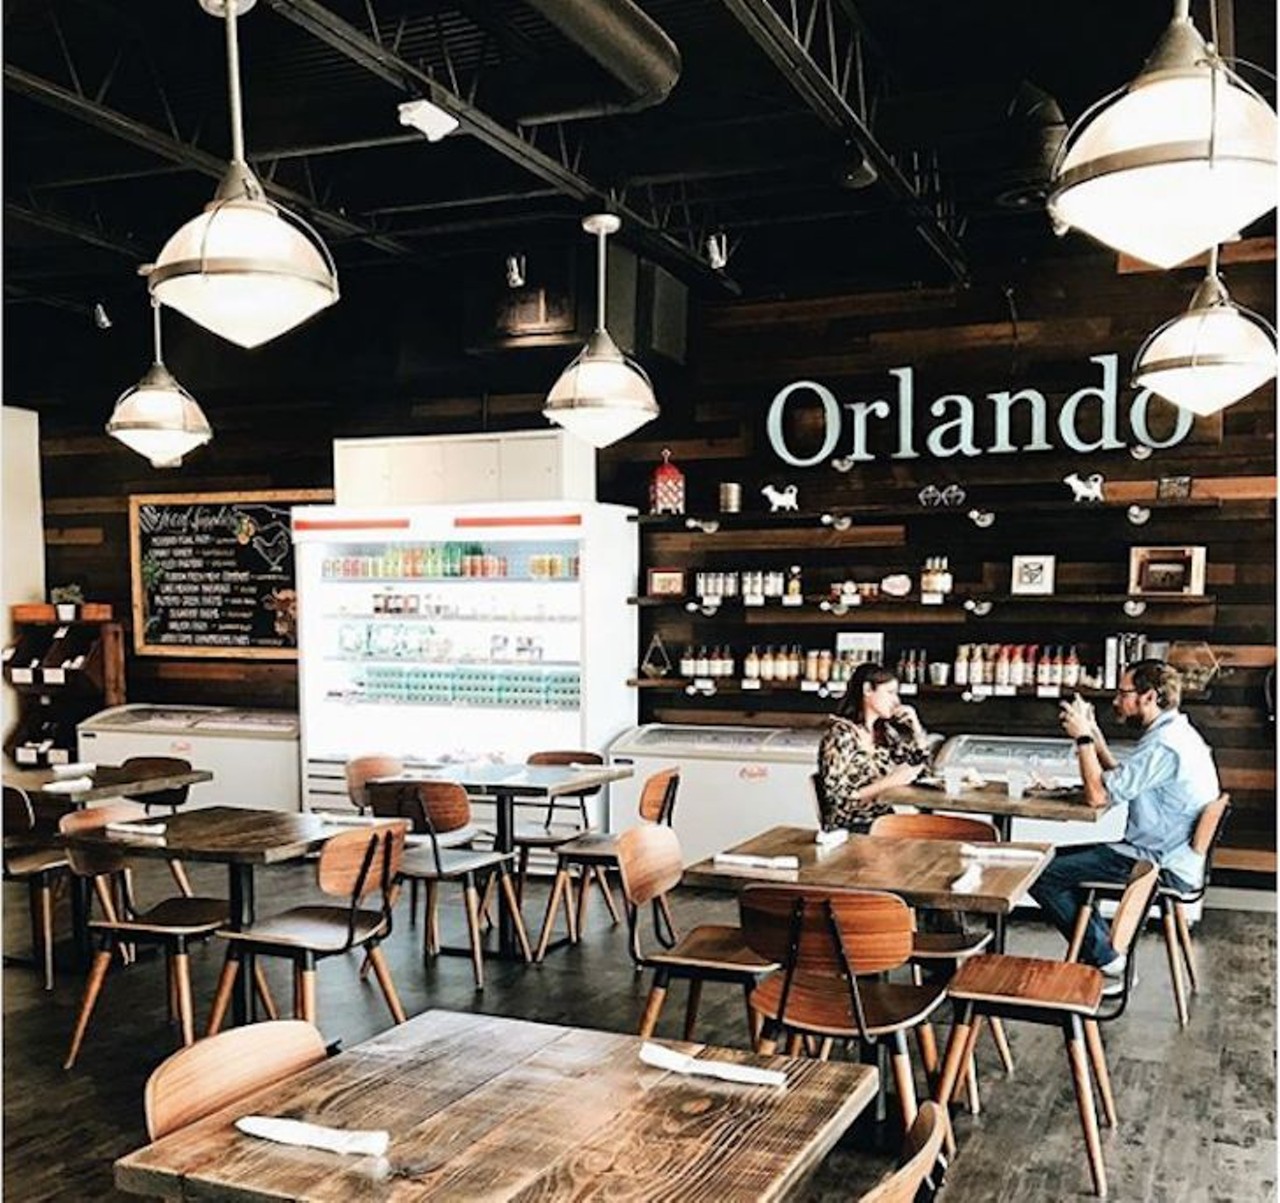 Orlando Meats
728 Virginia Dr., 407-598-0700 
Tired of the traditional and well known Keke&#146;s and First Watch for breakfast and brunch needs? Check out this cool little urban place; Orlando Meats, dives head first into this meat market that is a meat-lovers escape. 
Photo via annastamatic/Instagram